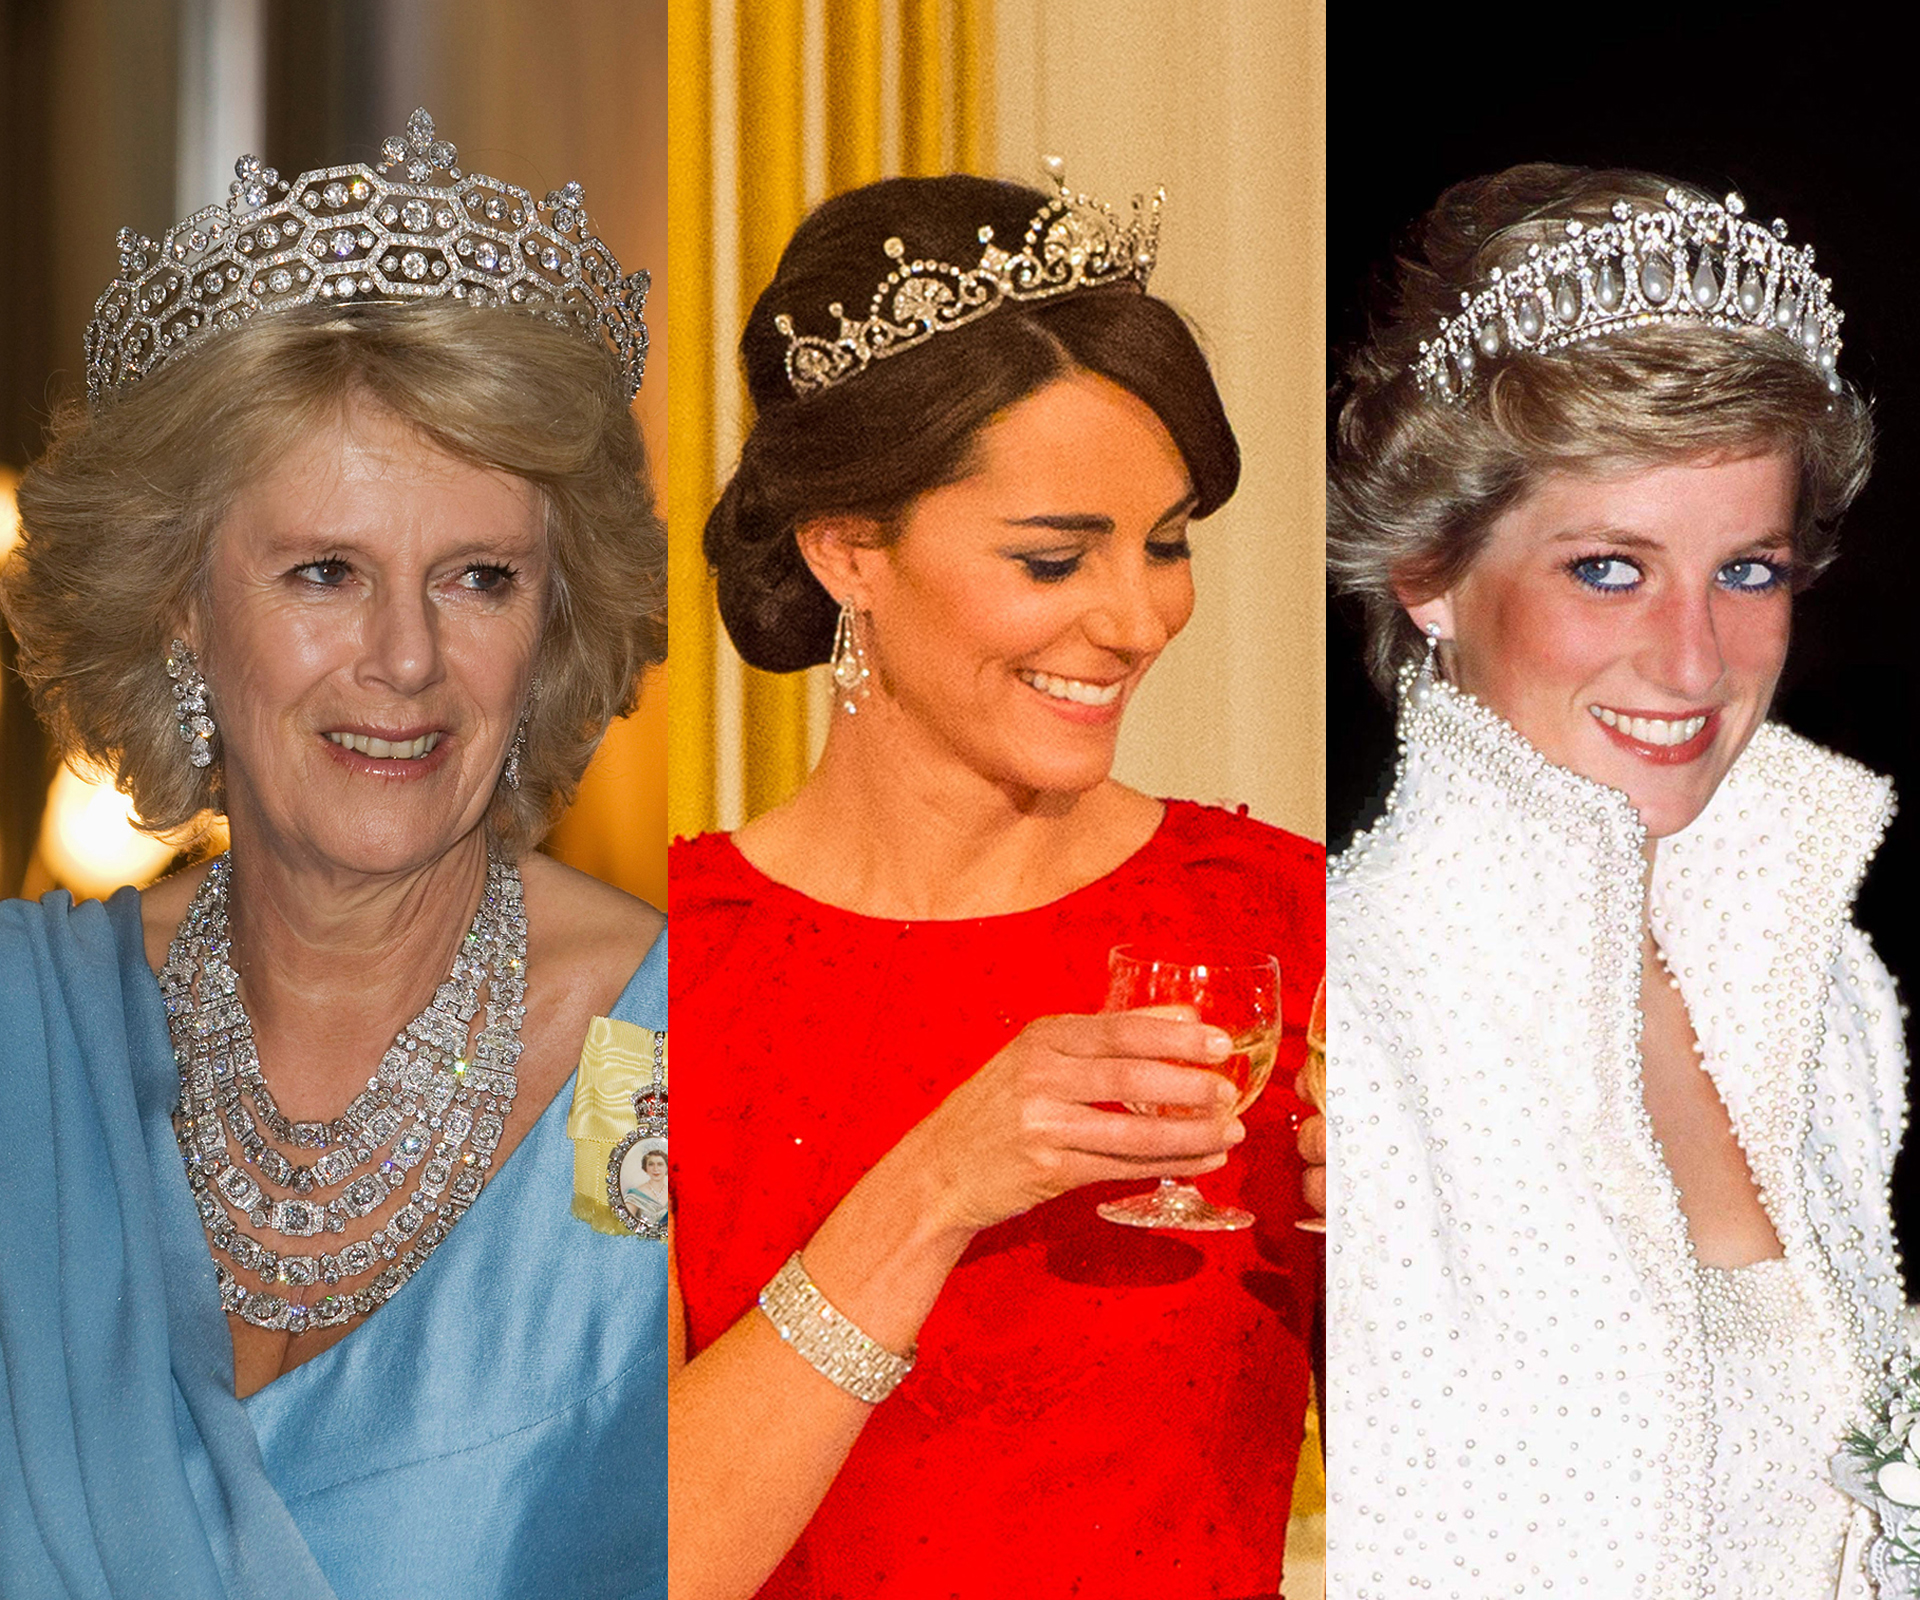 Sparkling royals! The best of royal jewels